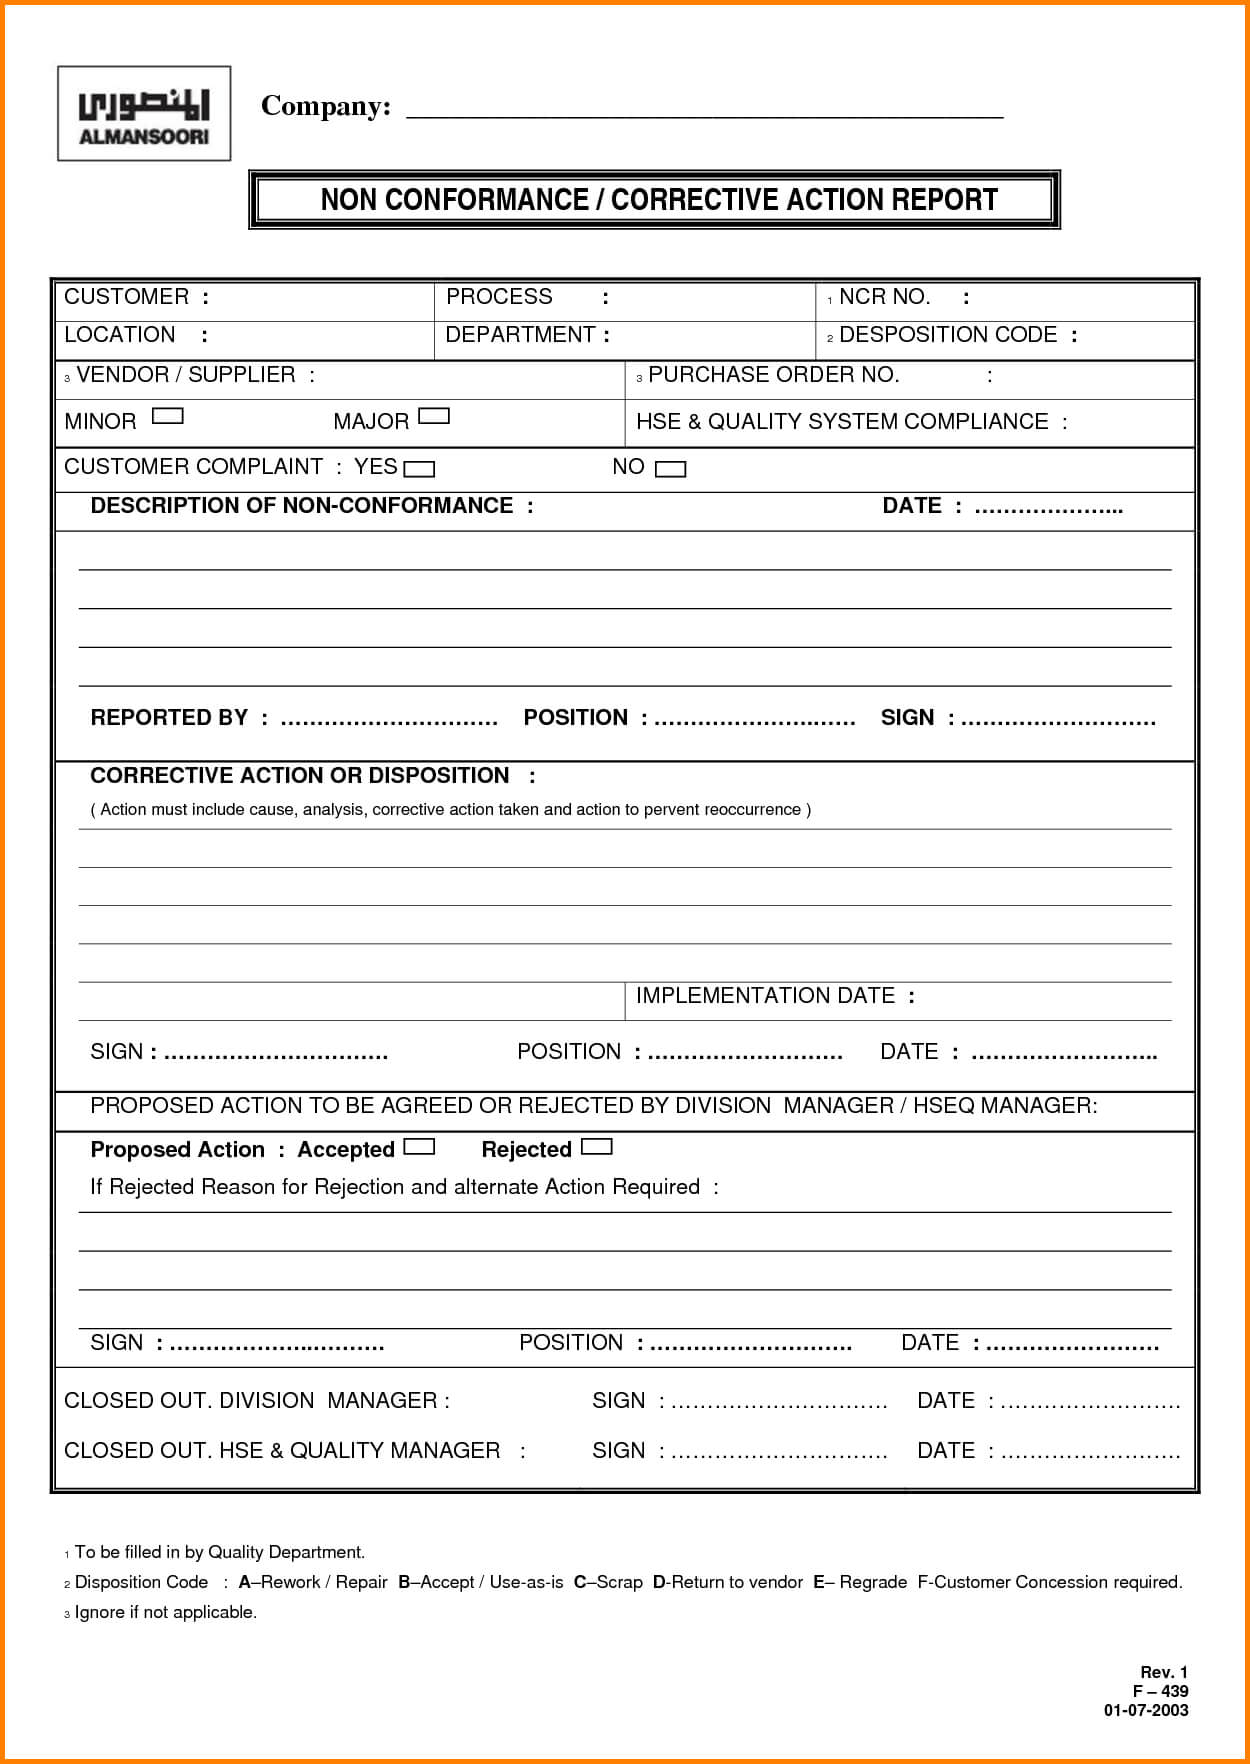 042 20Index Of Cdn8200253 Corrective20Ion Form Sample Format In Ncr Report Template